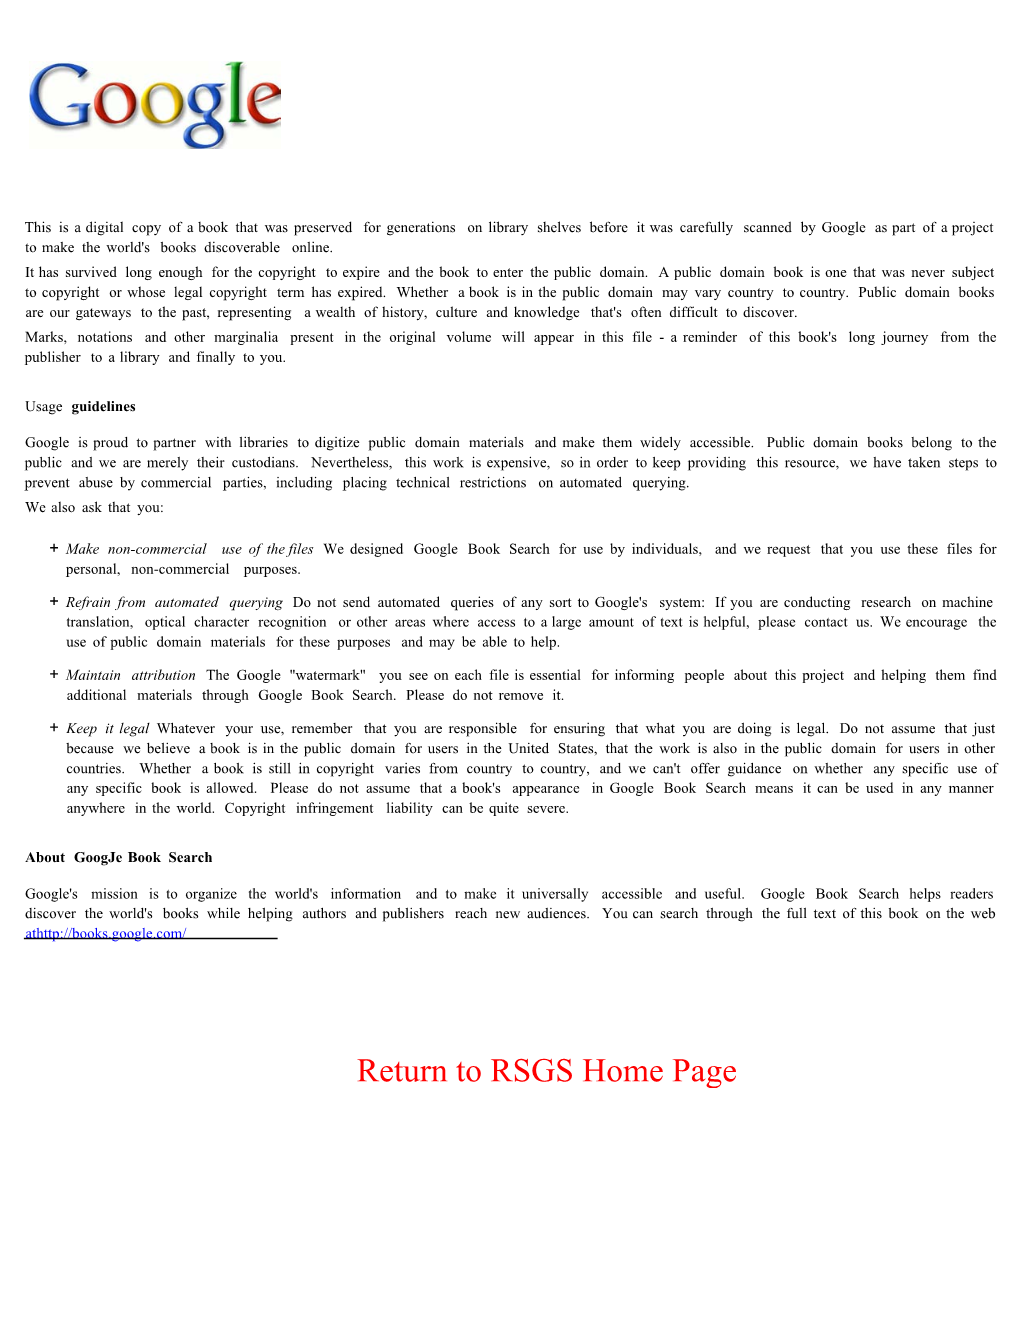 RSGS Home Page